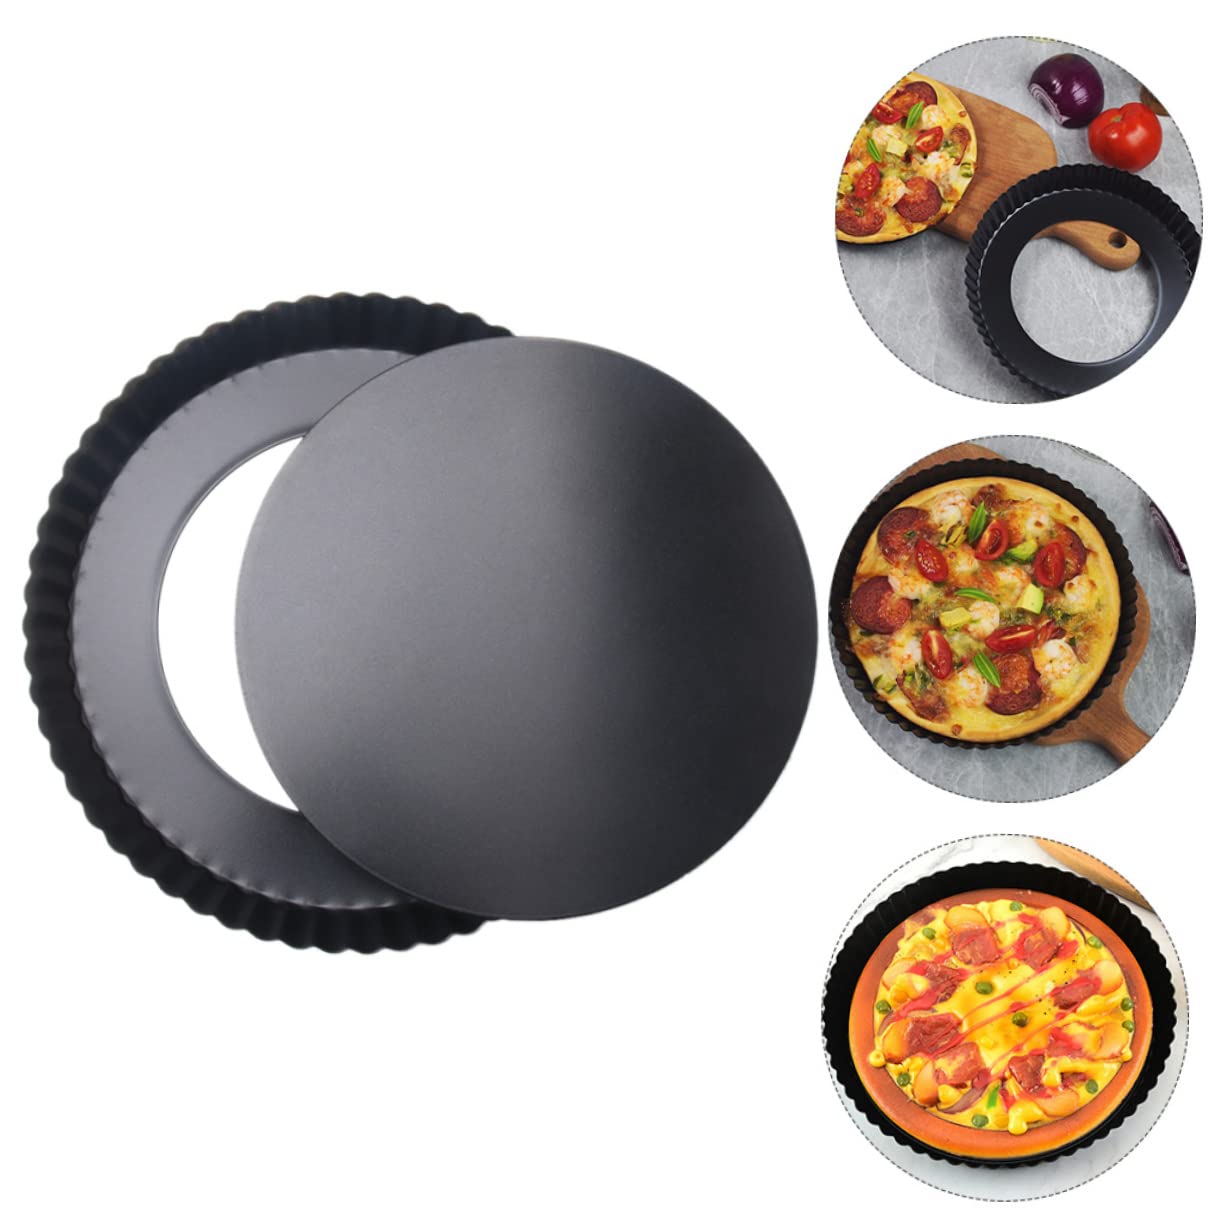 DOITOOL 2 Pcs Pizza Plate Cookie Oven Cupcake Baking Pan Cookie Pie Baking Pan Pizza Baking Dish Cake Pan with Removable Bottom Pizza DIY Convenient Baking Tray Novel Cake